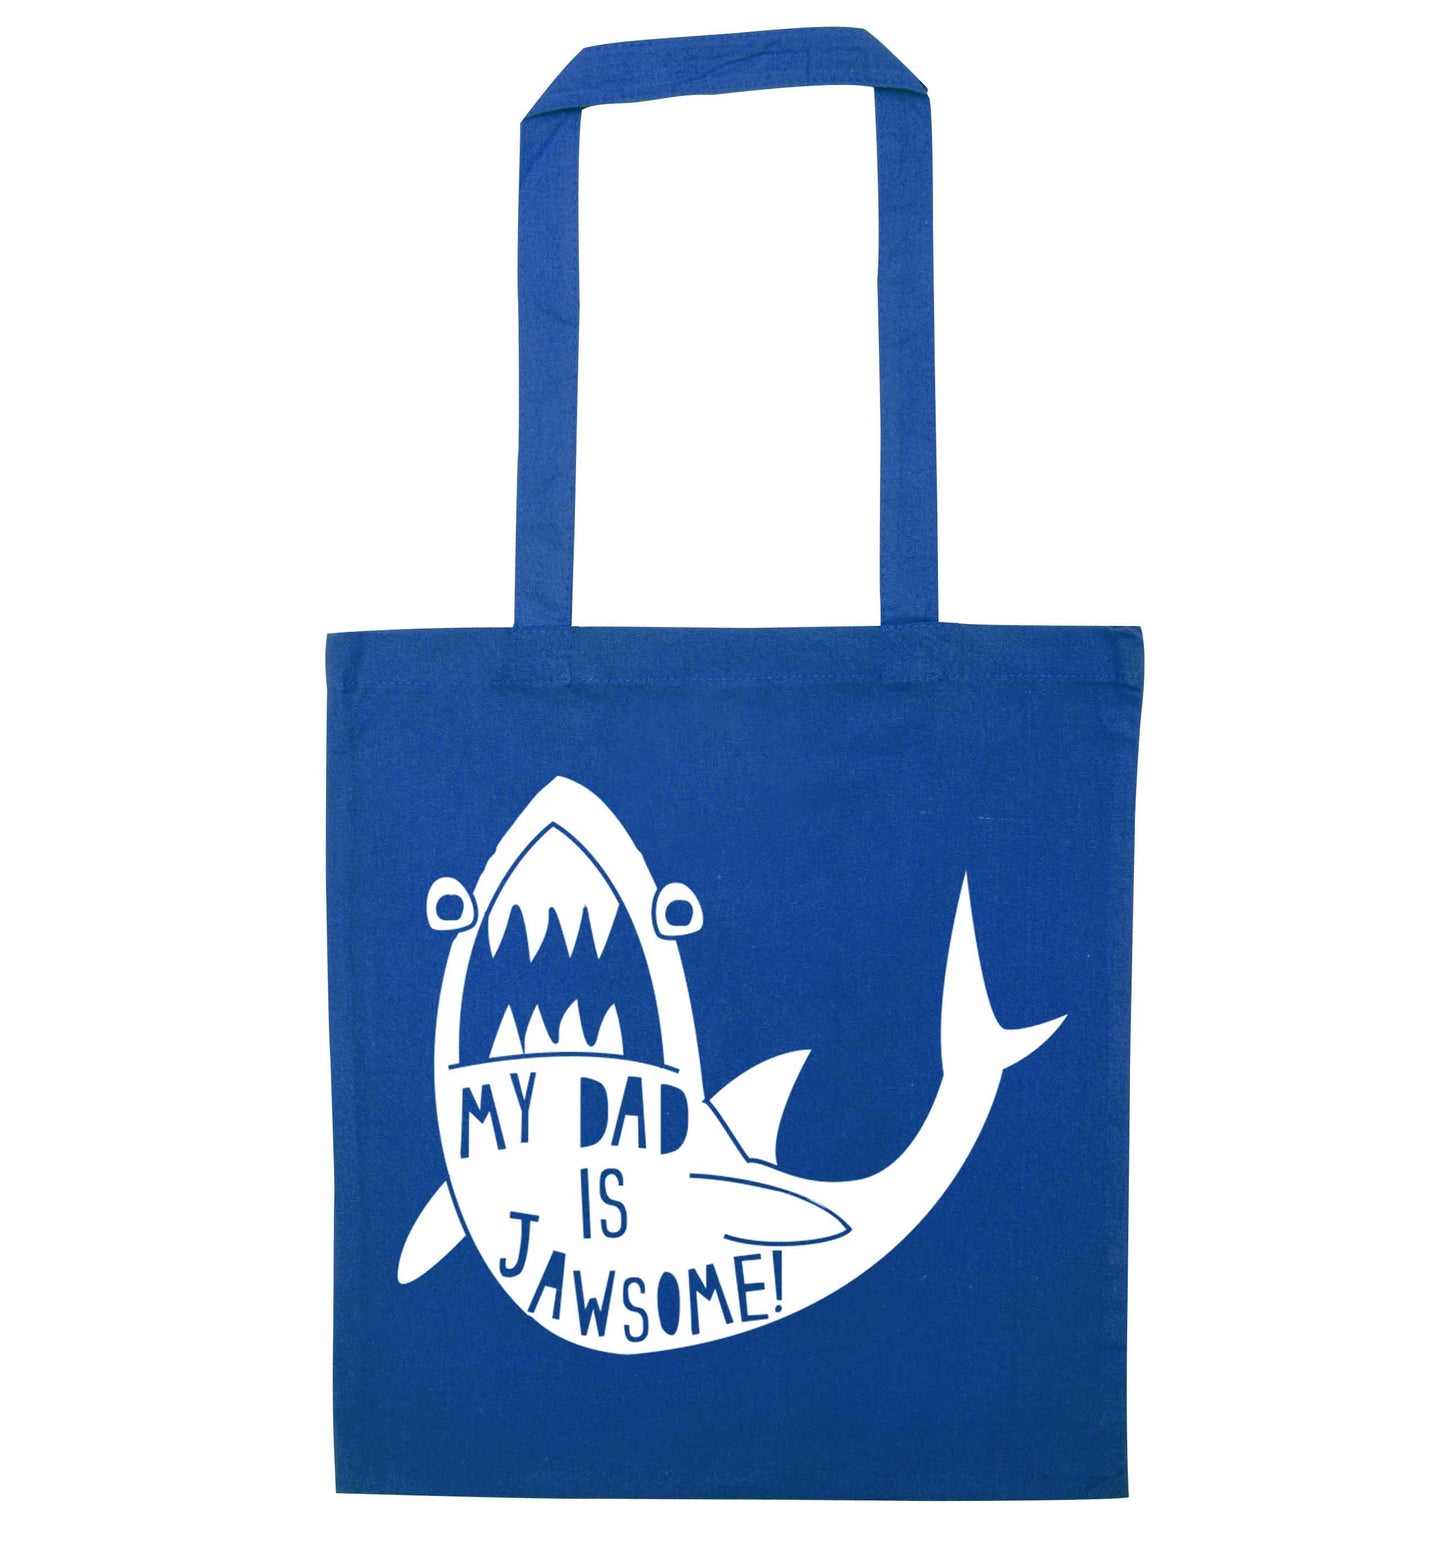 My Dad is jawsome blue tote bag